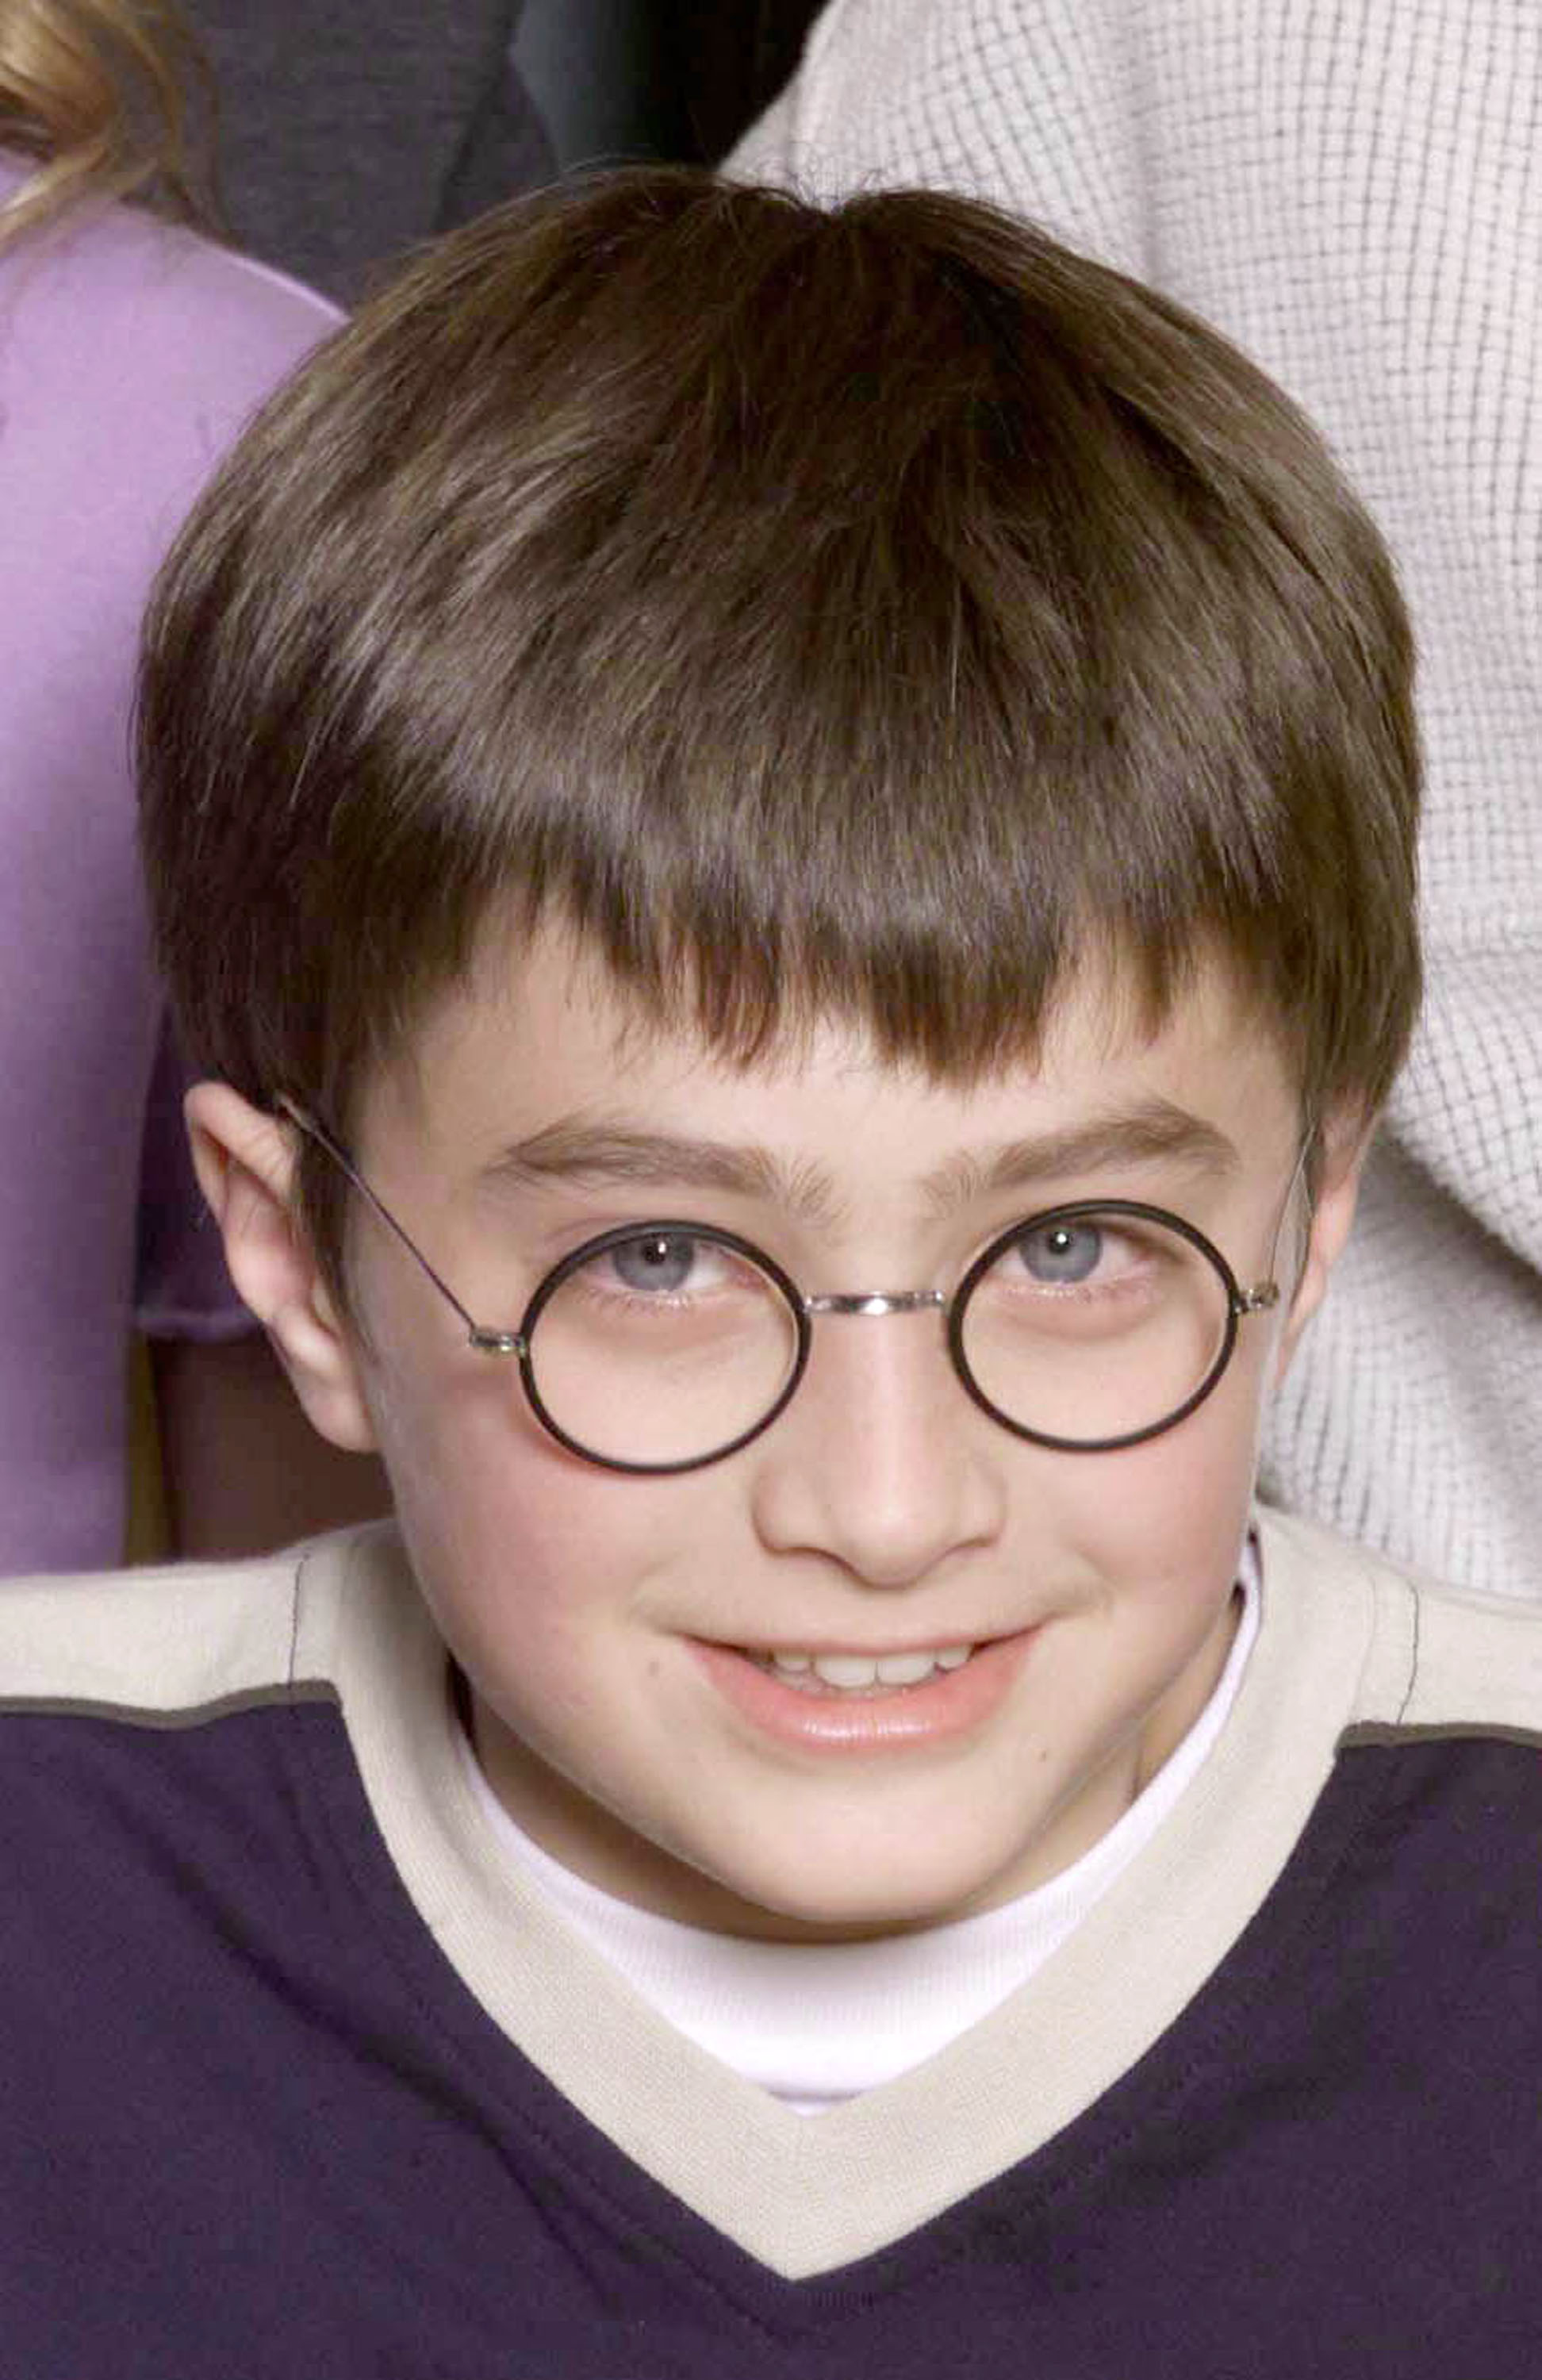 The boy at a press conference for the movie "Harry Potter and The Philosopher's Stone" in London on August 23, 2000 | Source: Getty Images